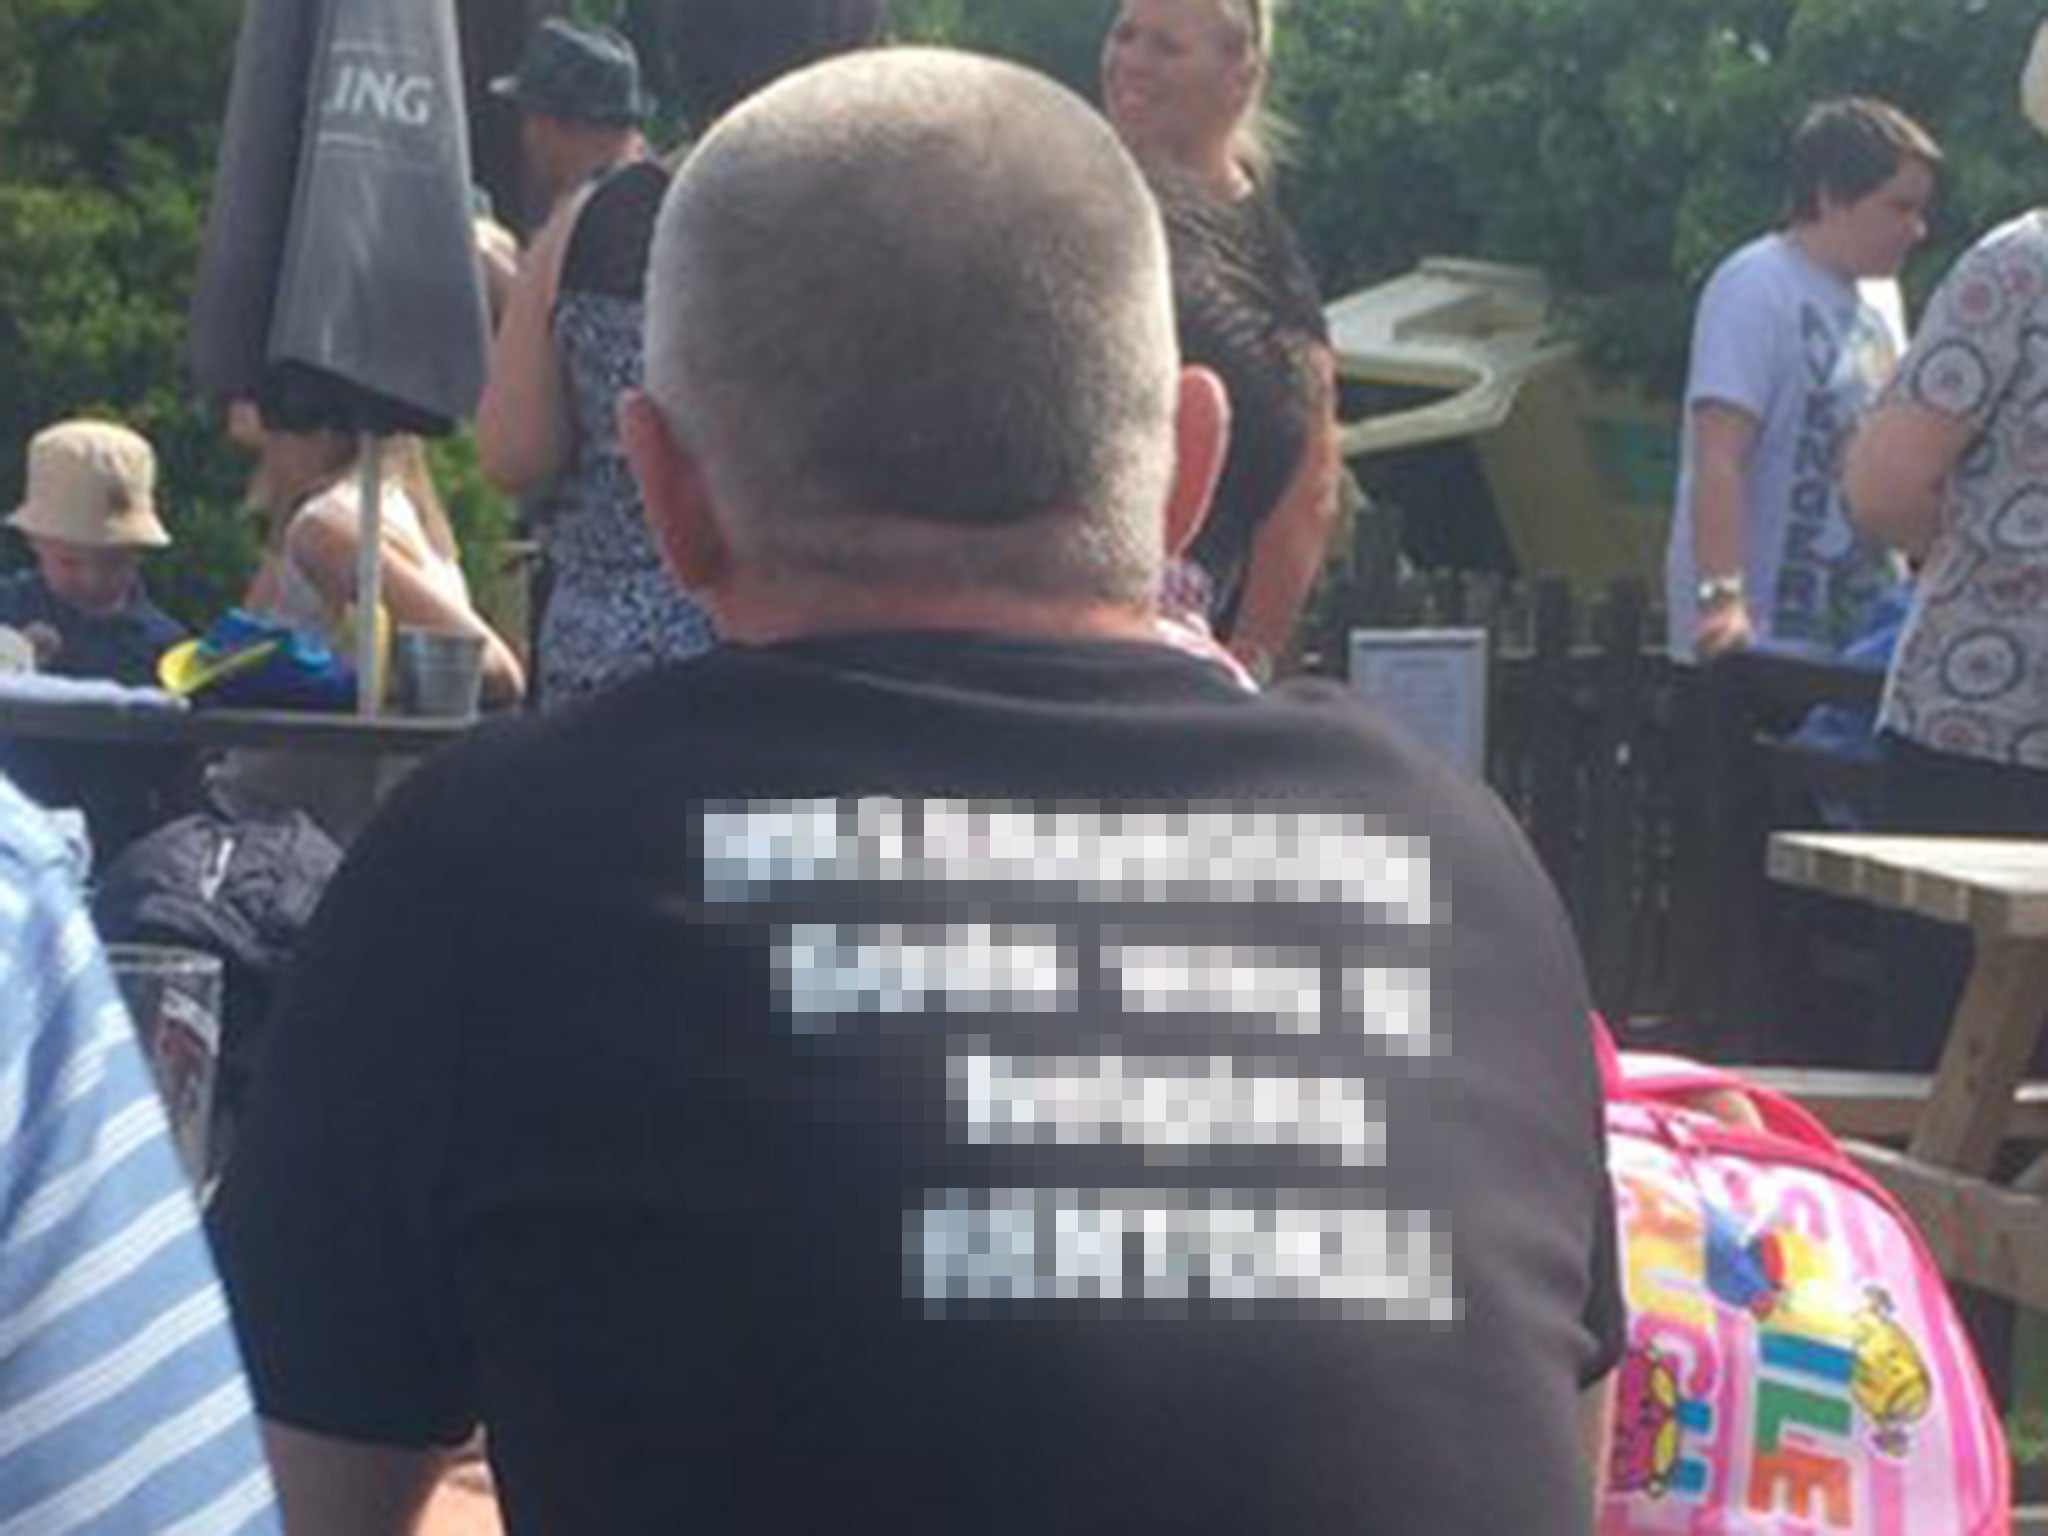 The man was banned from the pub for wearing the t-shirt